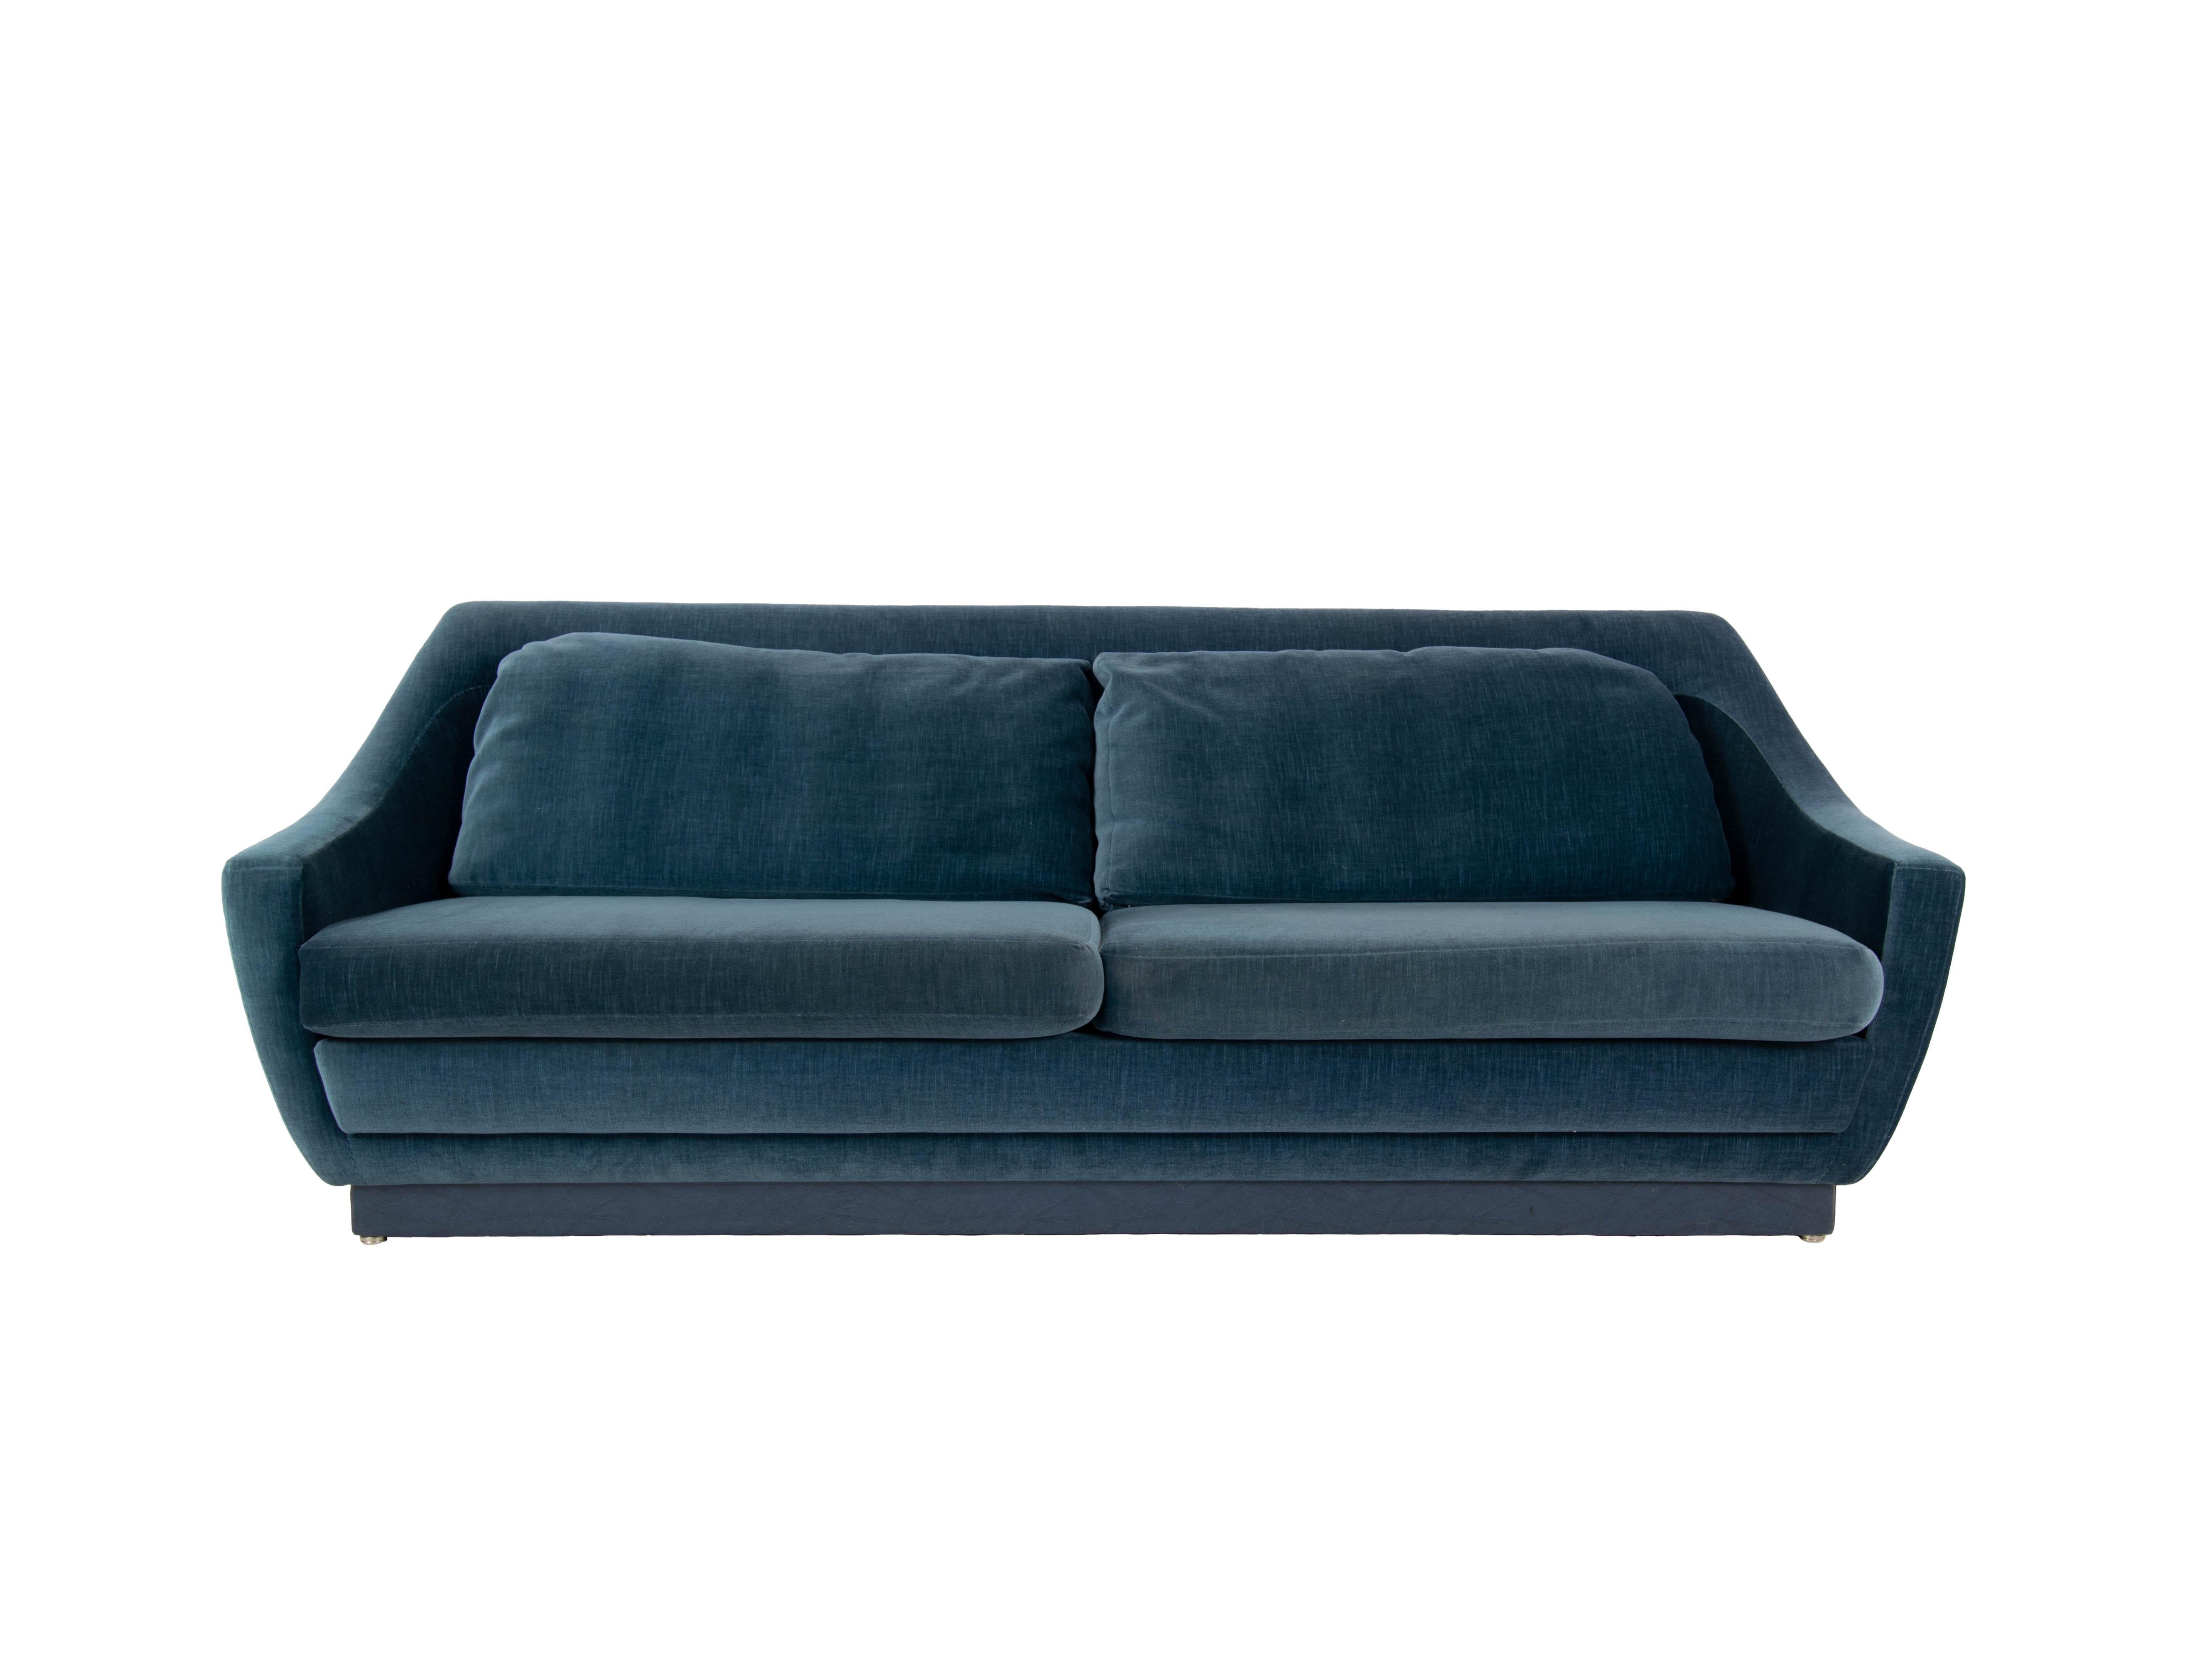 Impressive Art Deco style Sofa, which is very professionally upholstered in 1988 by 'Bröring Interieur B.V'. in Amsterdam. It has blue velvet fabric with an edge on the bottom in blue leather. The sofa easily sits three people. It has two large